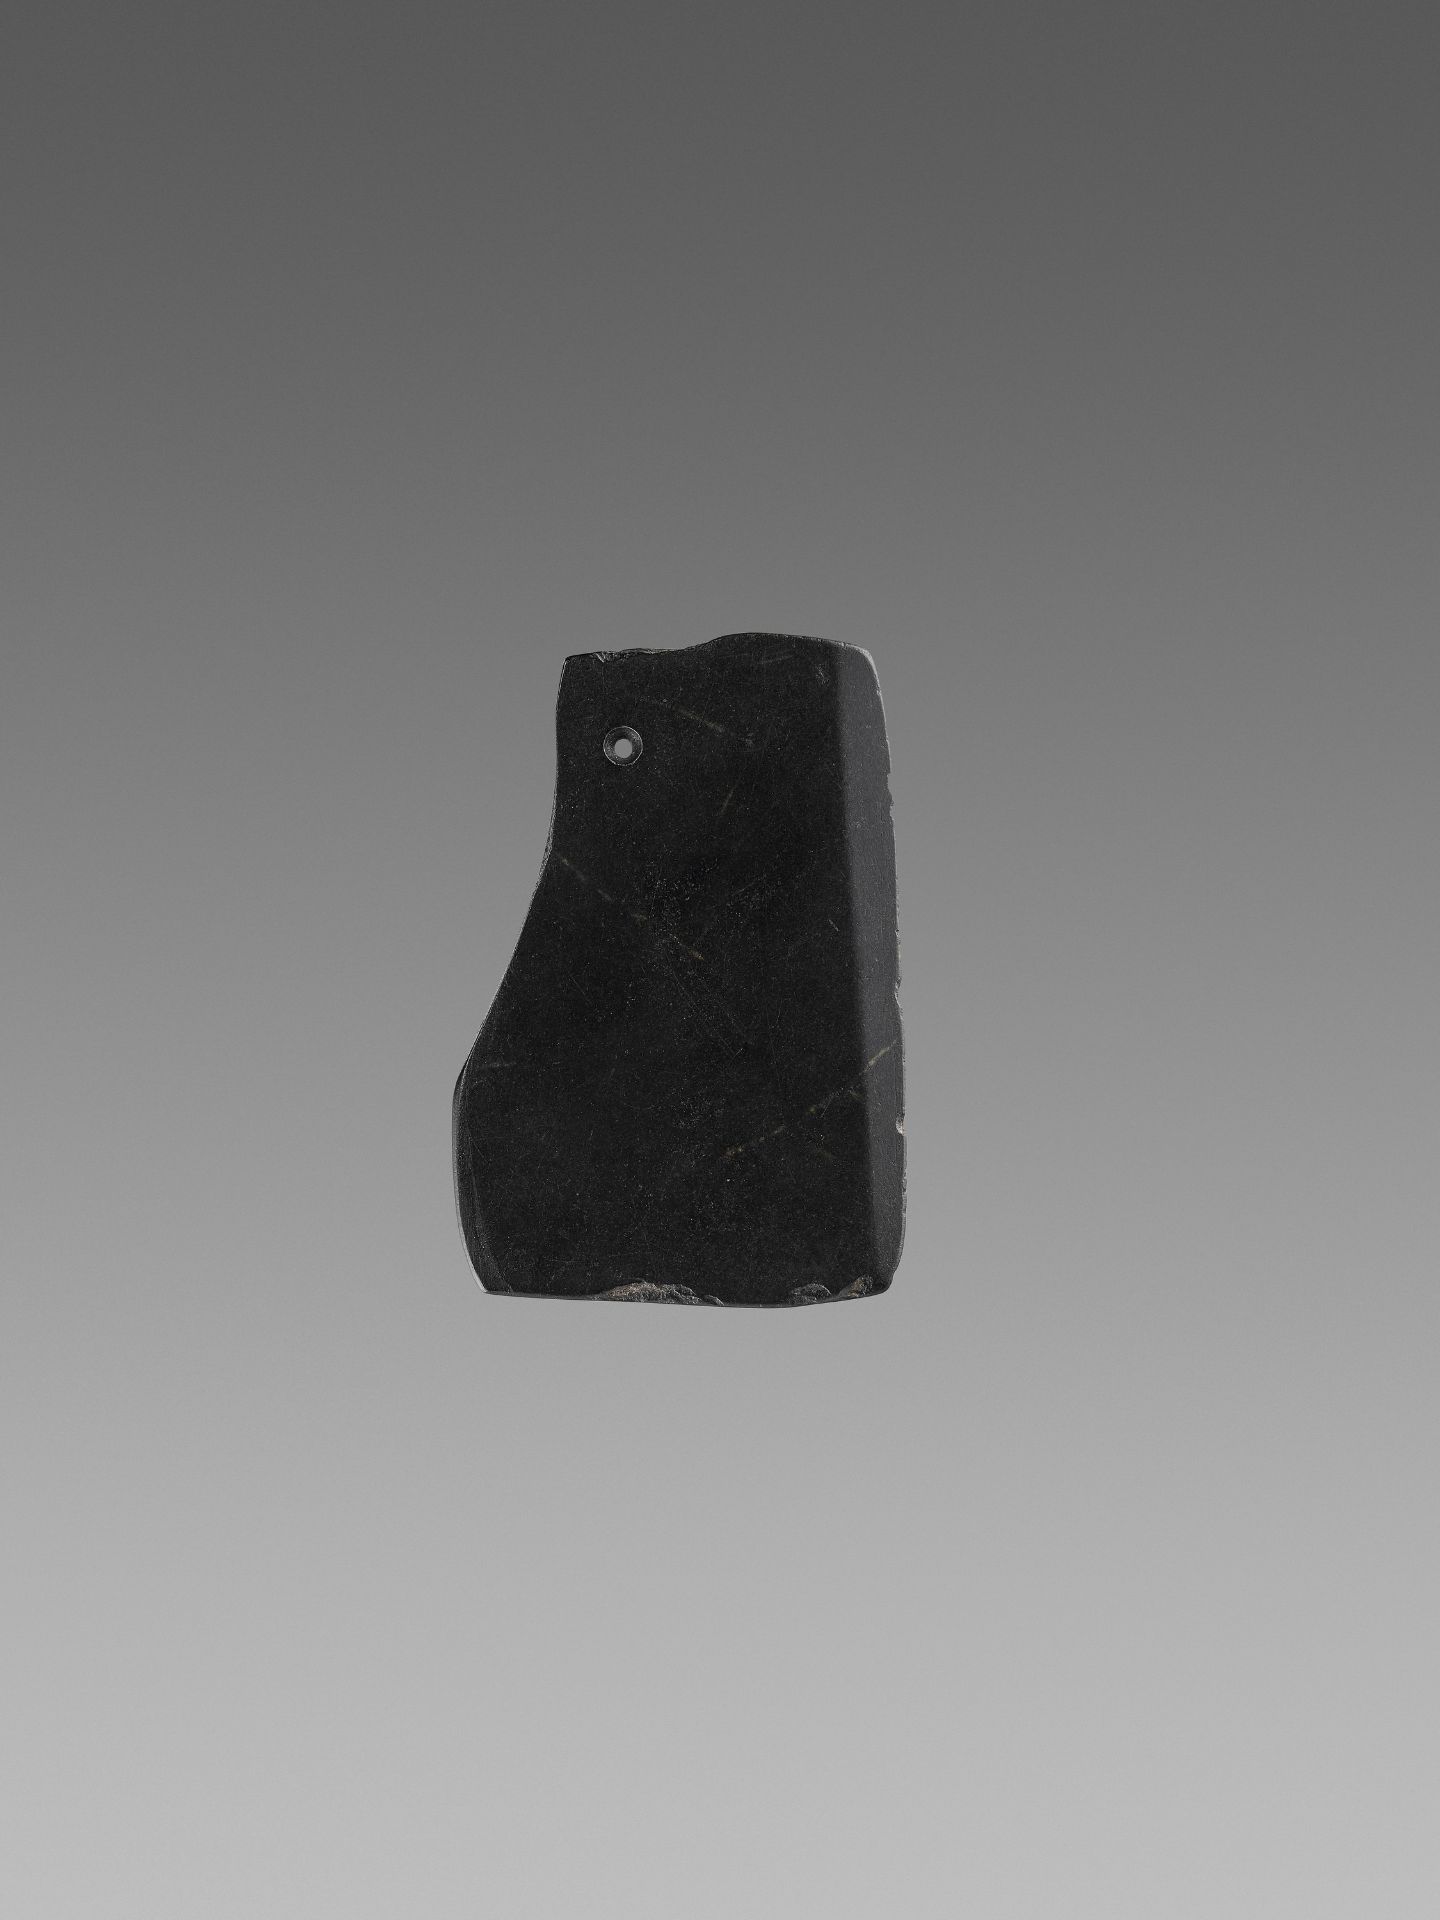 A BLACK JADE AXE, 2ND MILLENNIUM BC - Image 2 of 7